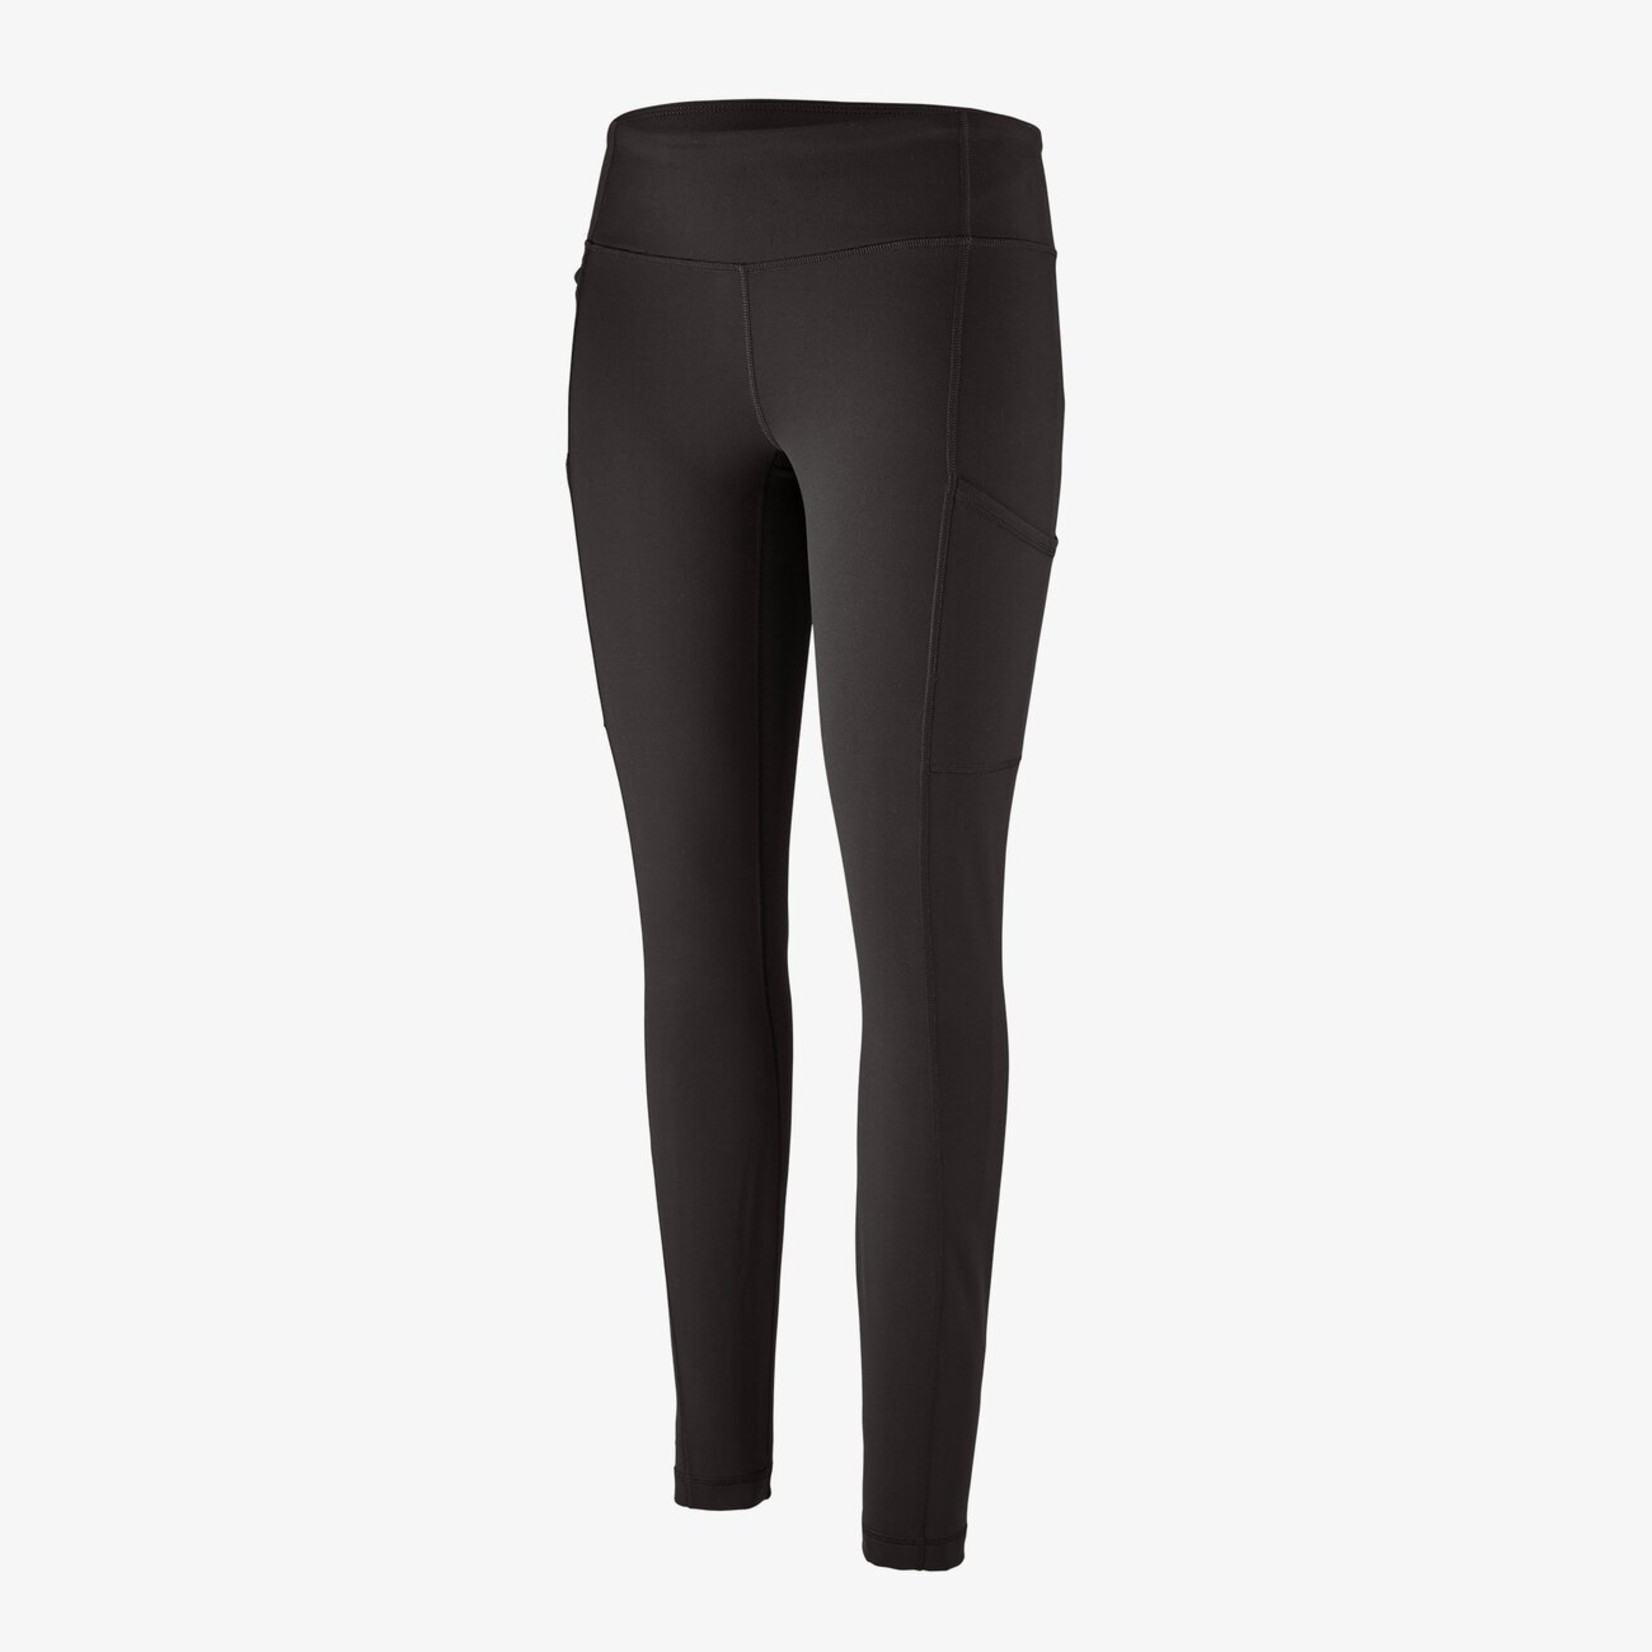 Patagonia W’s pack out tights